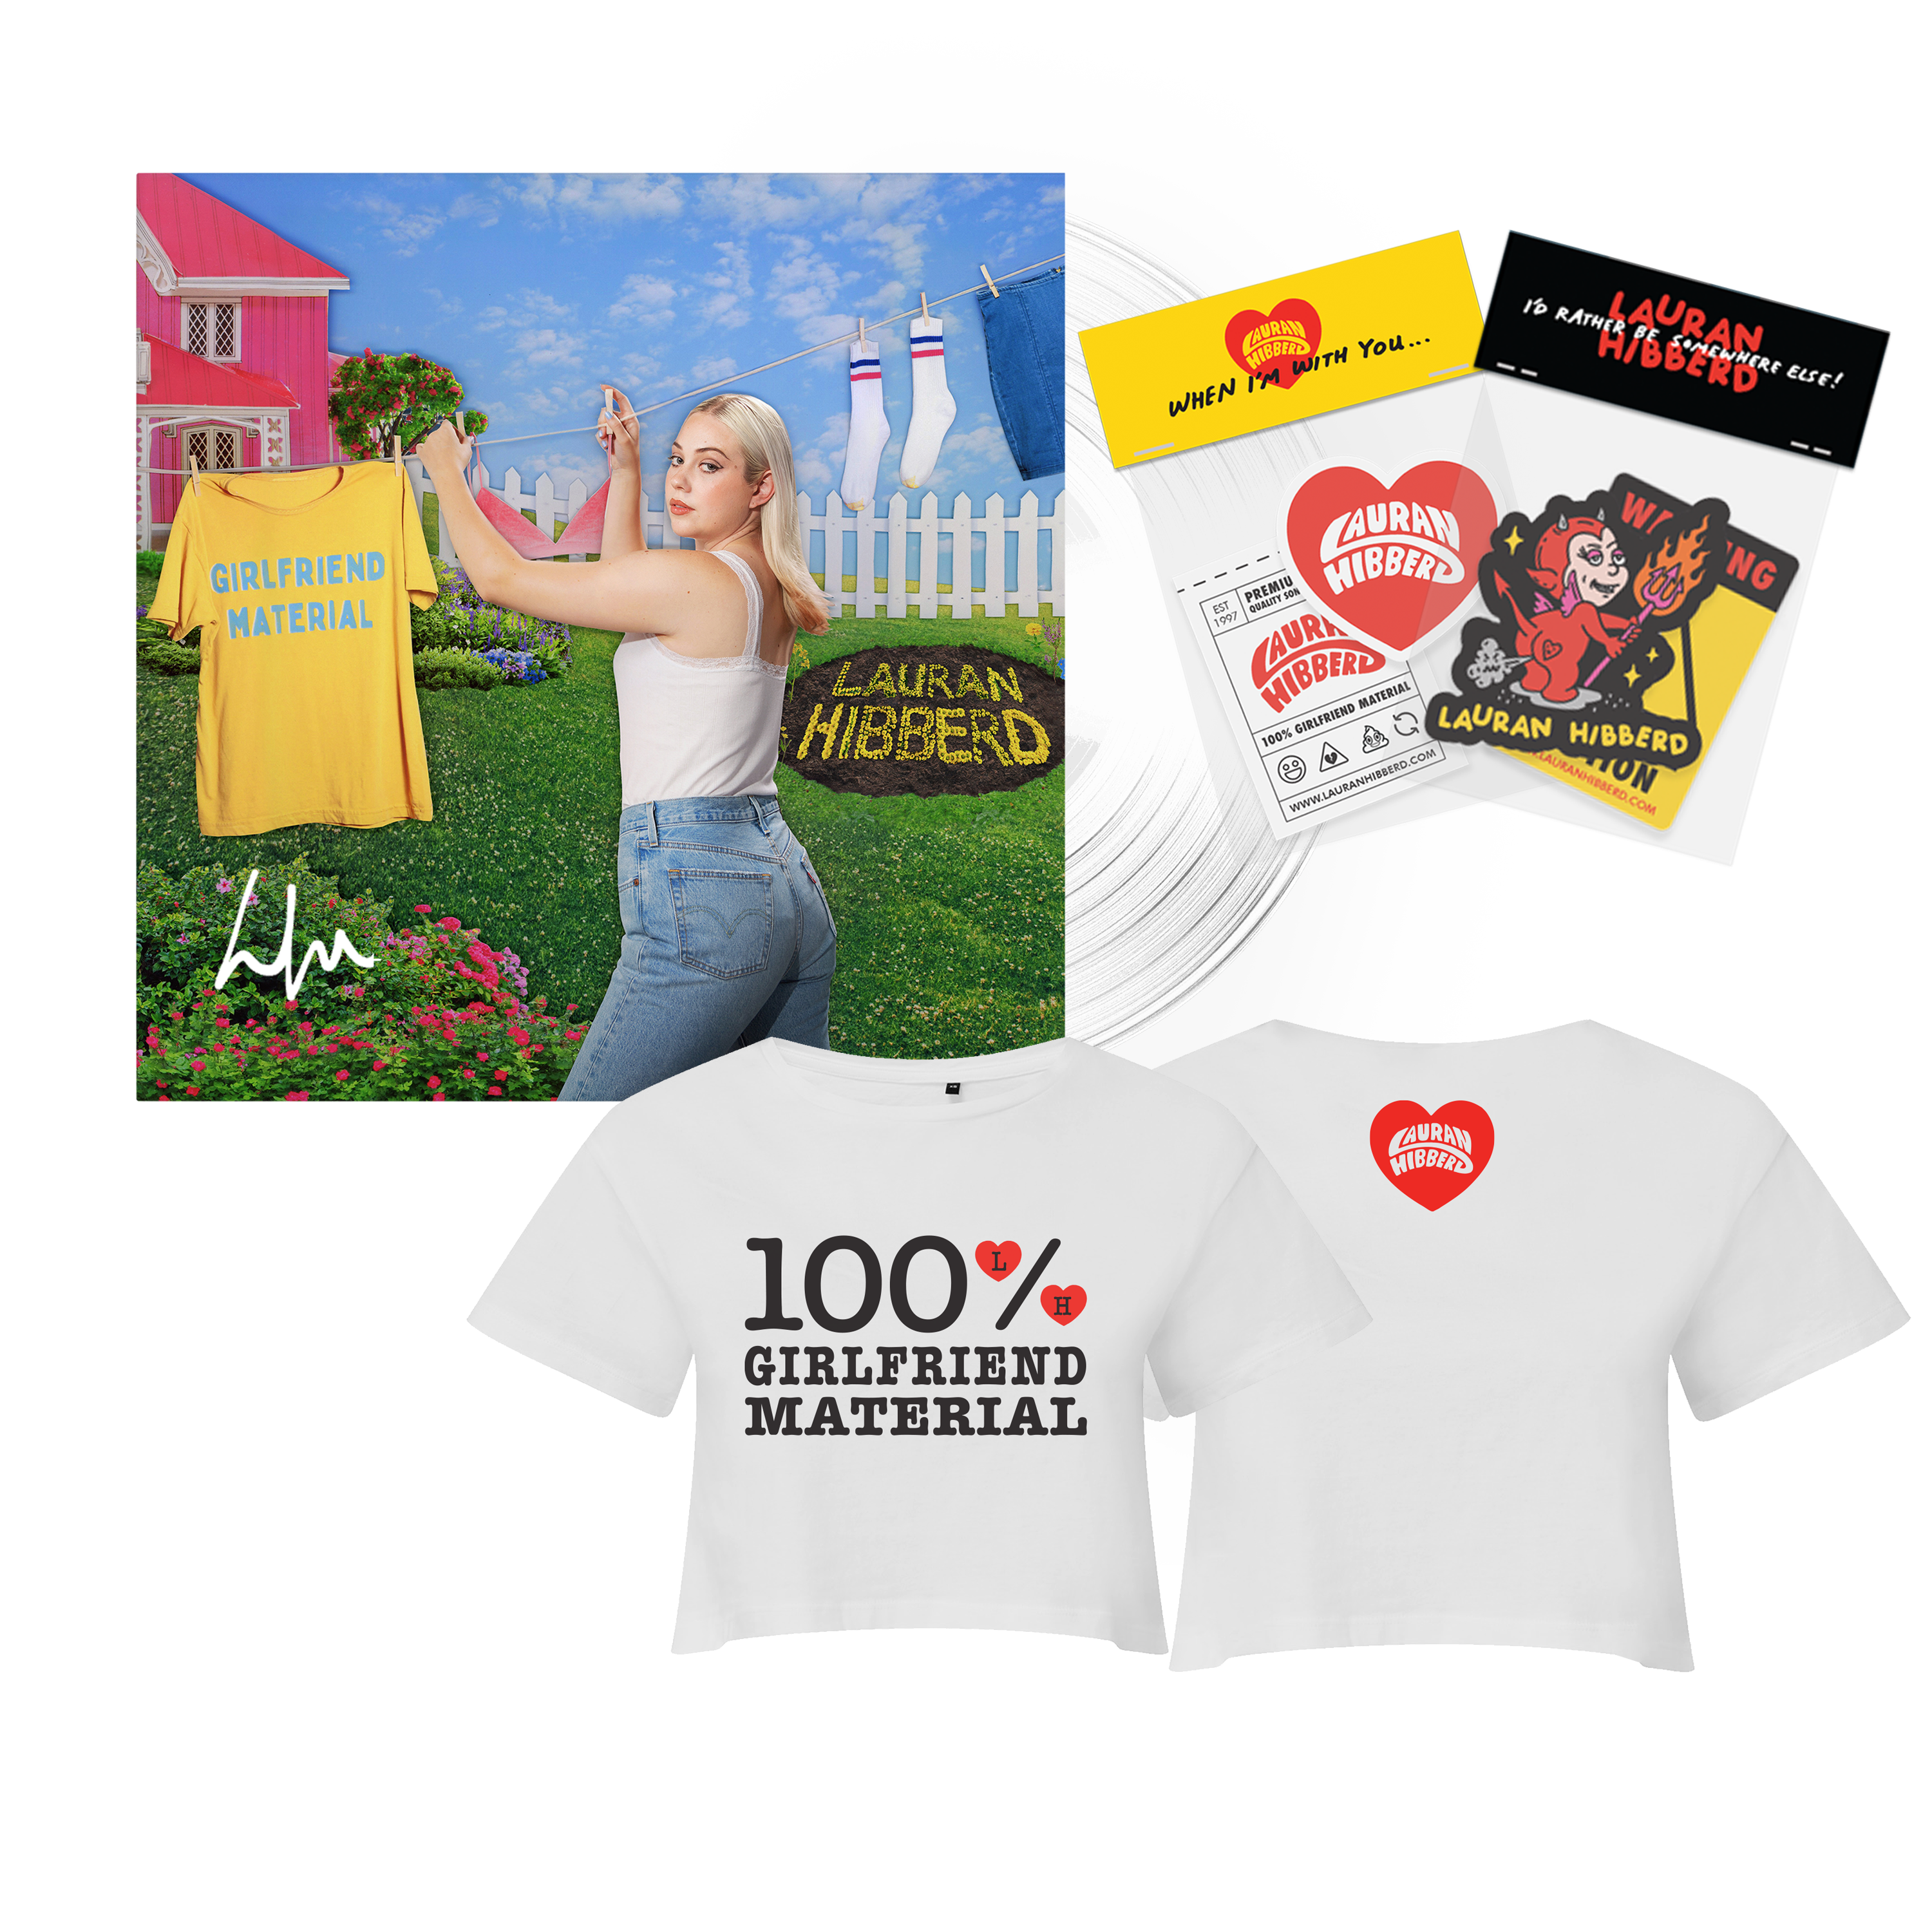 girlfriend material: Girlfriend Material Baby Tee, Sticker Pack + Signed Clear LP